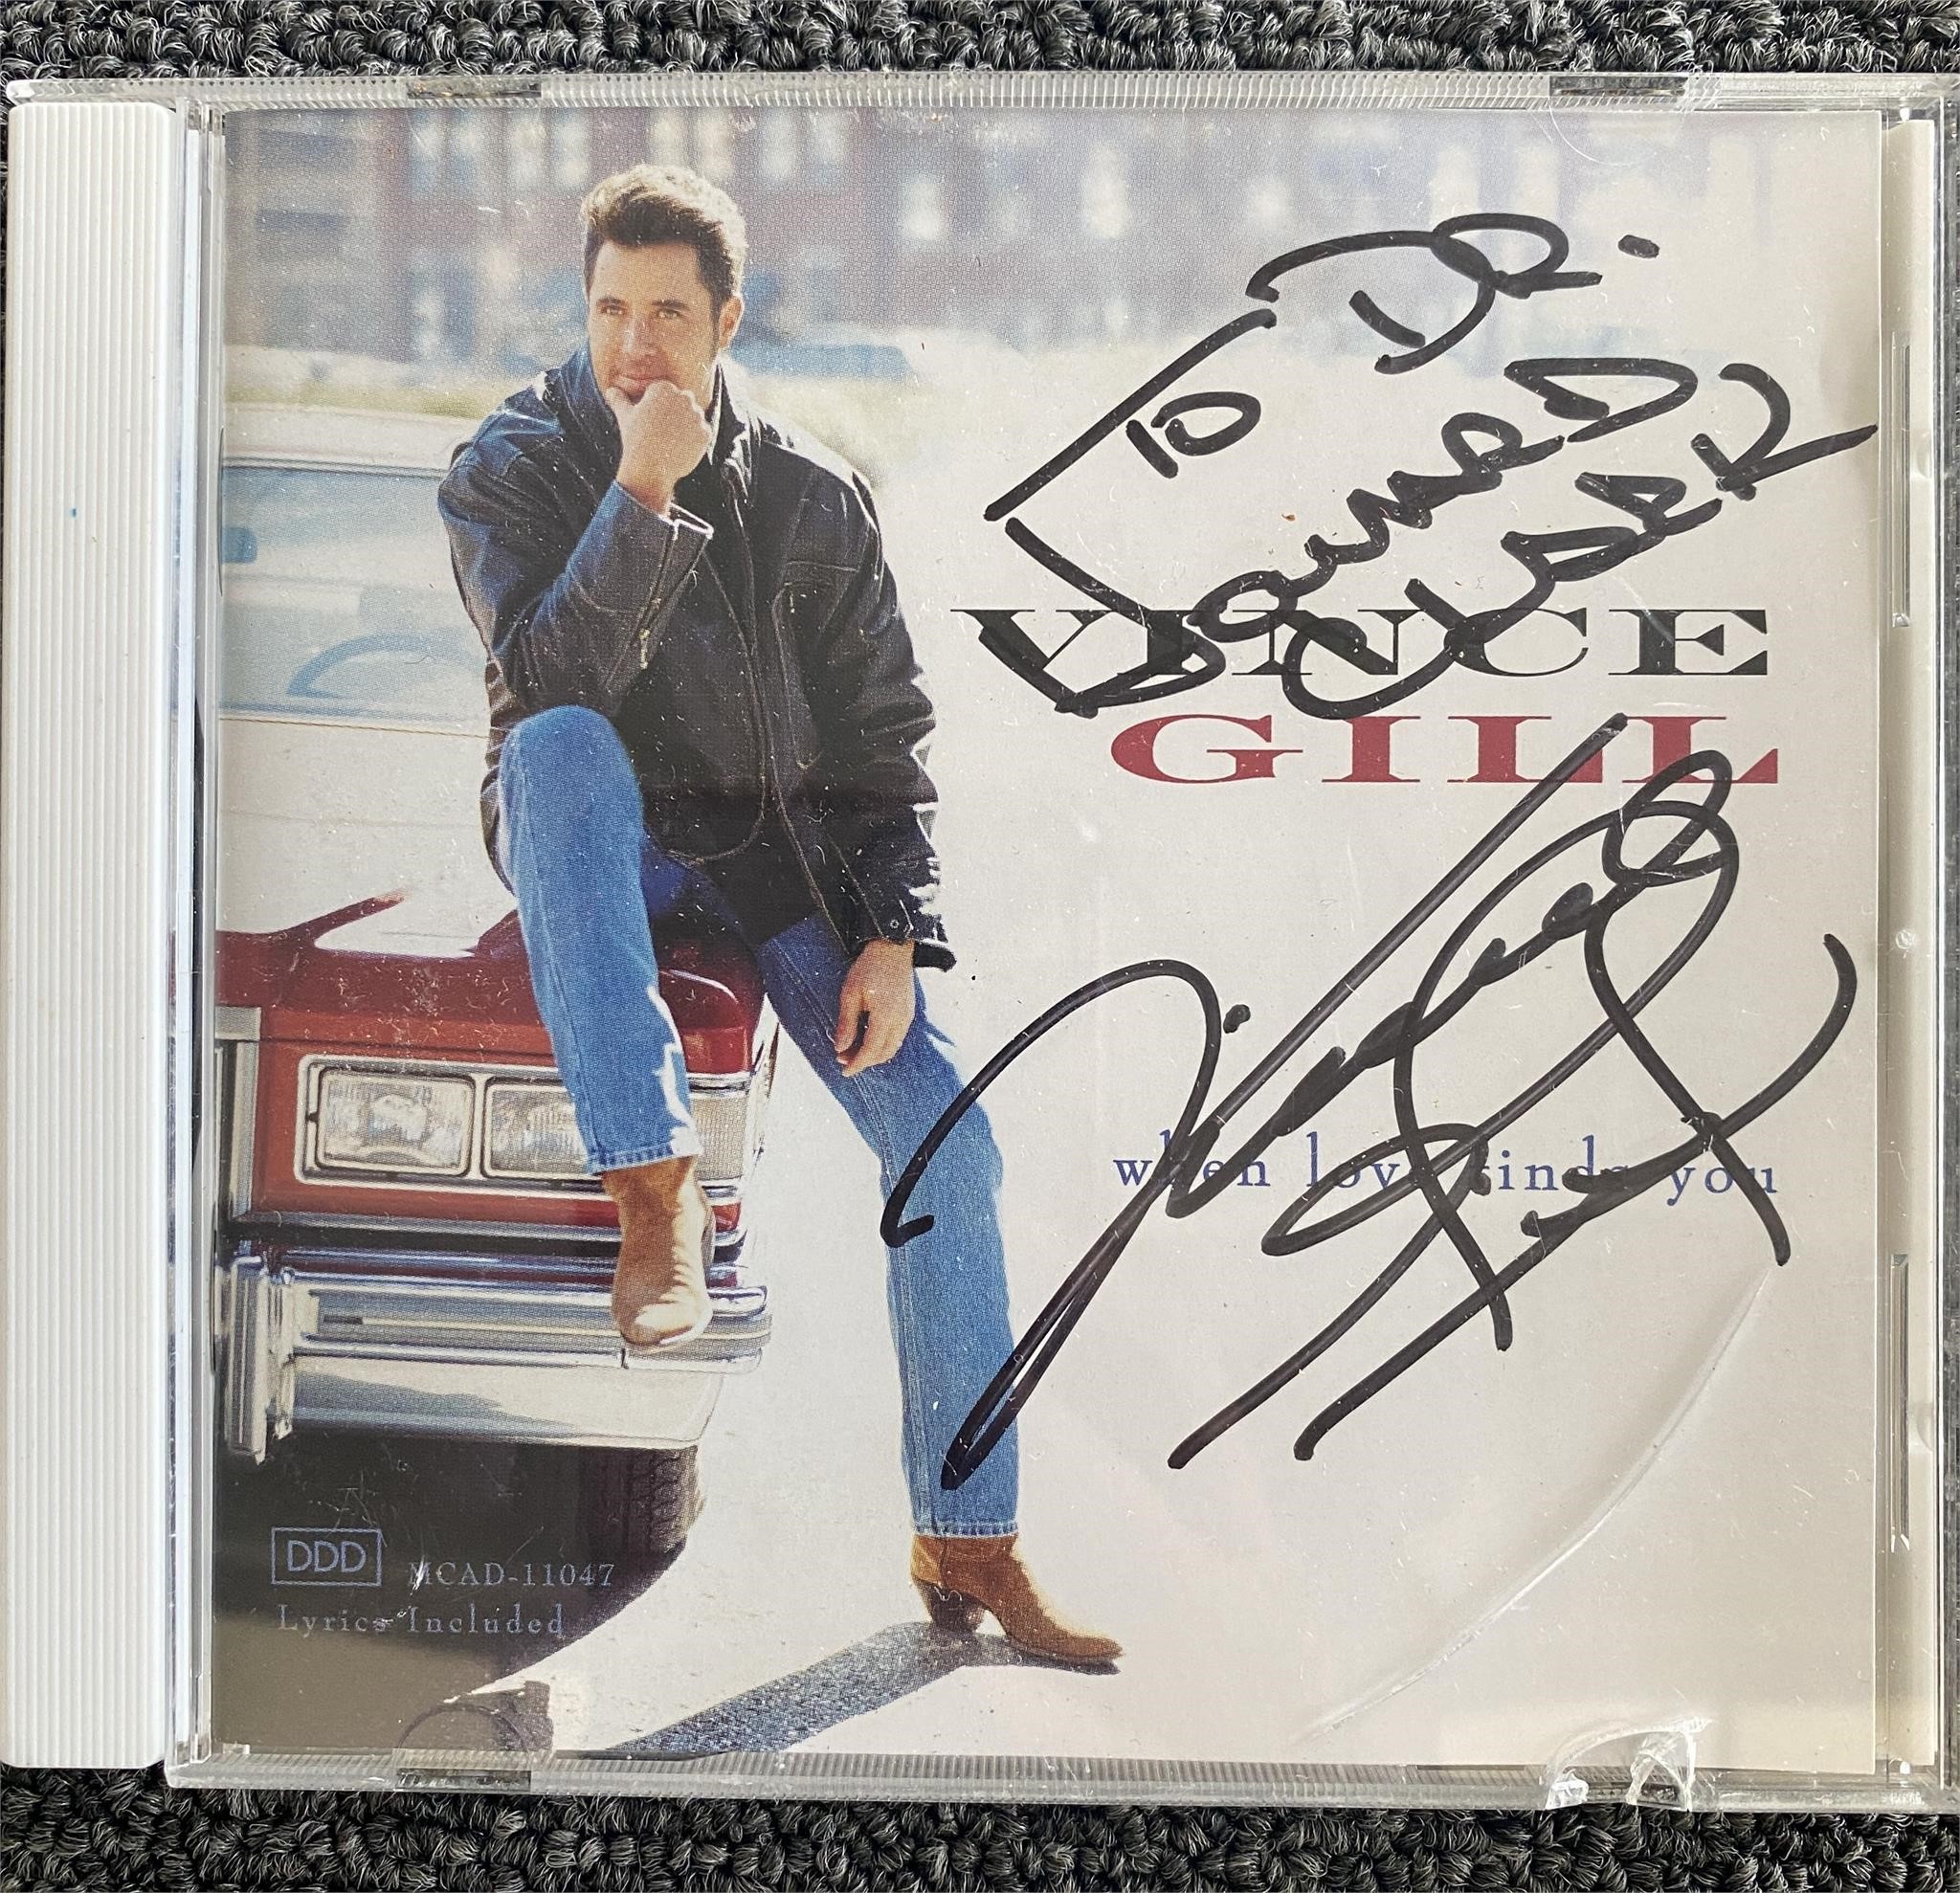 Vince Gill singed CD cover